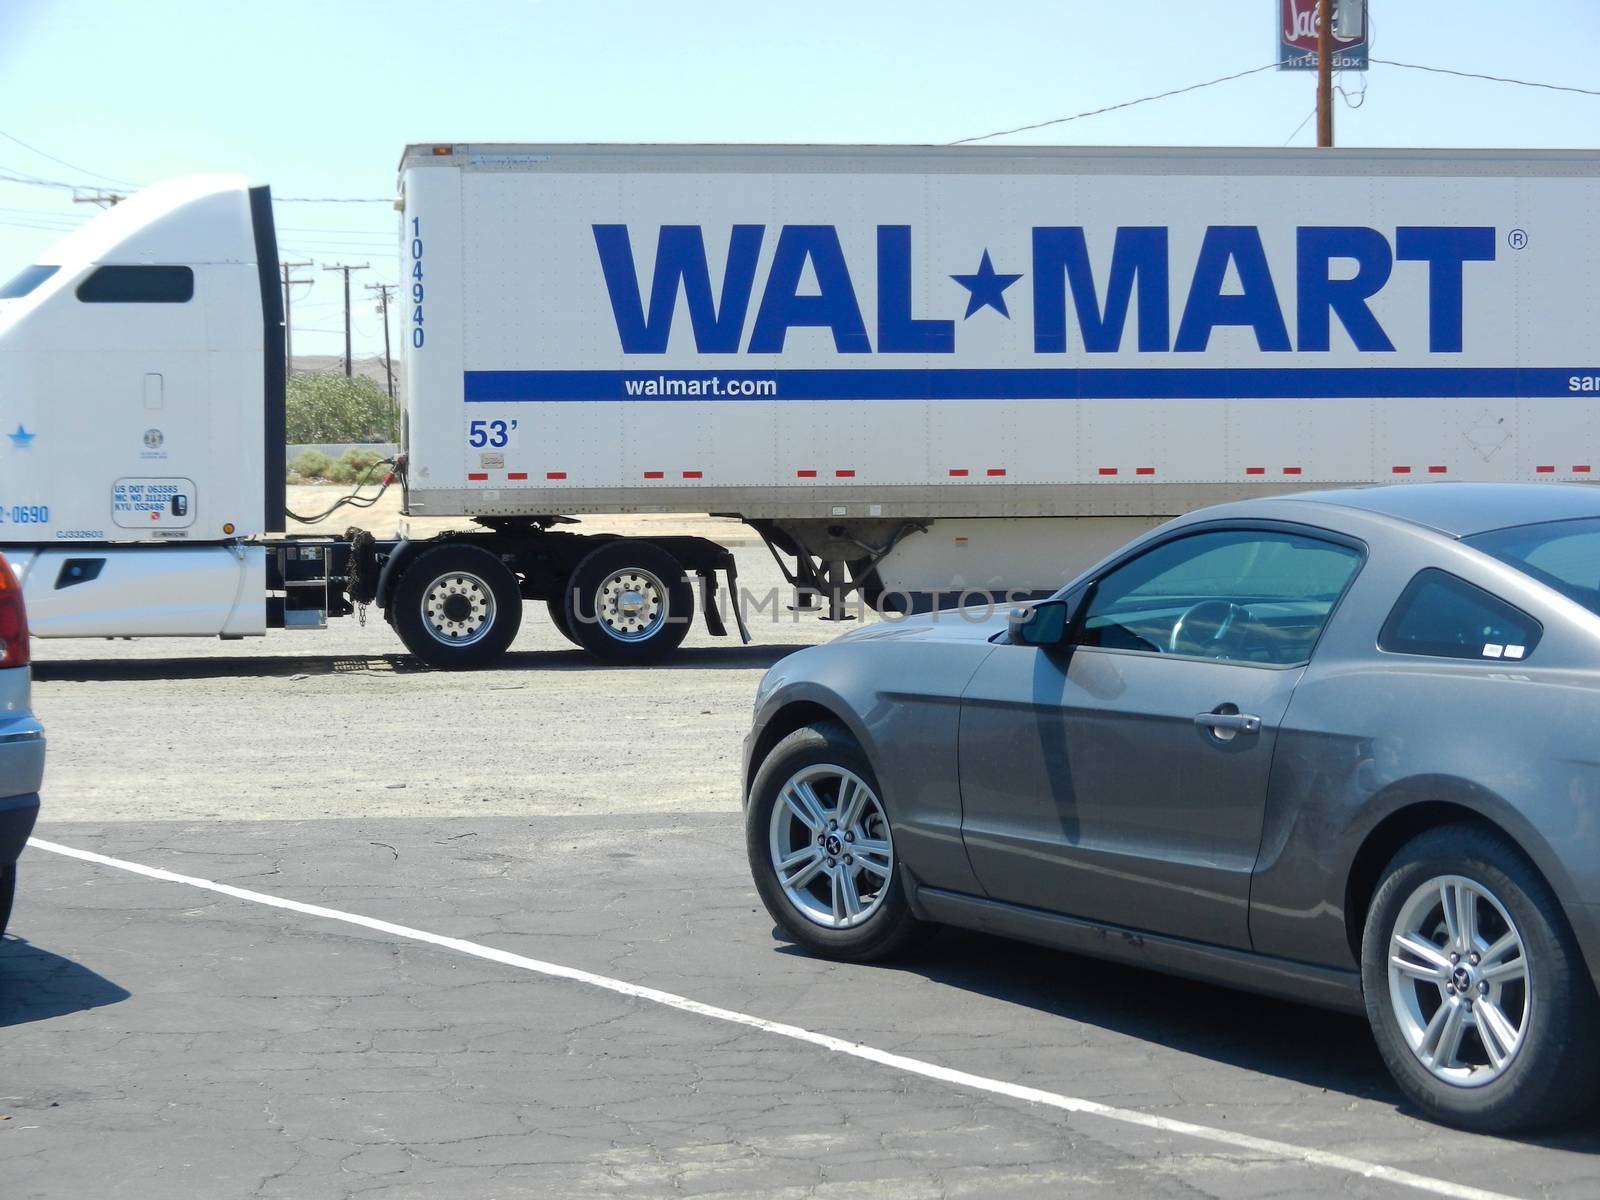 Sonora - JUL 22 : Wal-Mart Delivery Truck parked in the parking lot of a Walmart supermarket, Tuolumne County on July 22, 2015 in Sonora, California